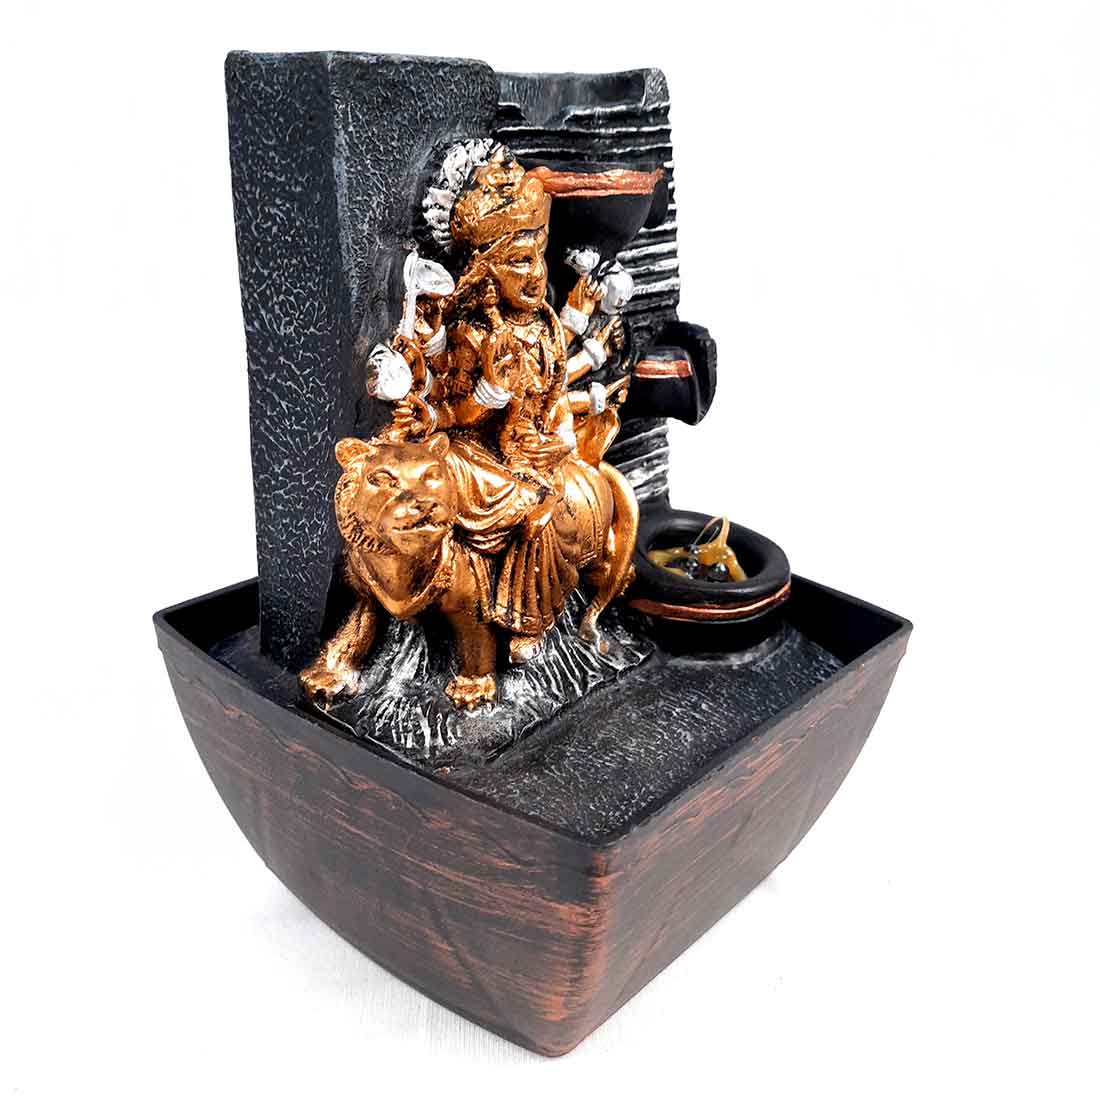 Indoor Water Fountain - Durga Maa LED Water Fountain - for Table Top & Office Decor - 8 Inch - ApkaMart